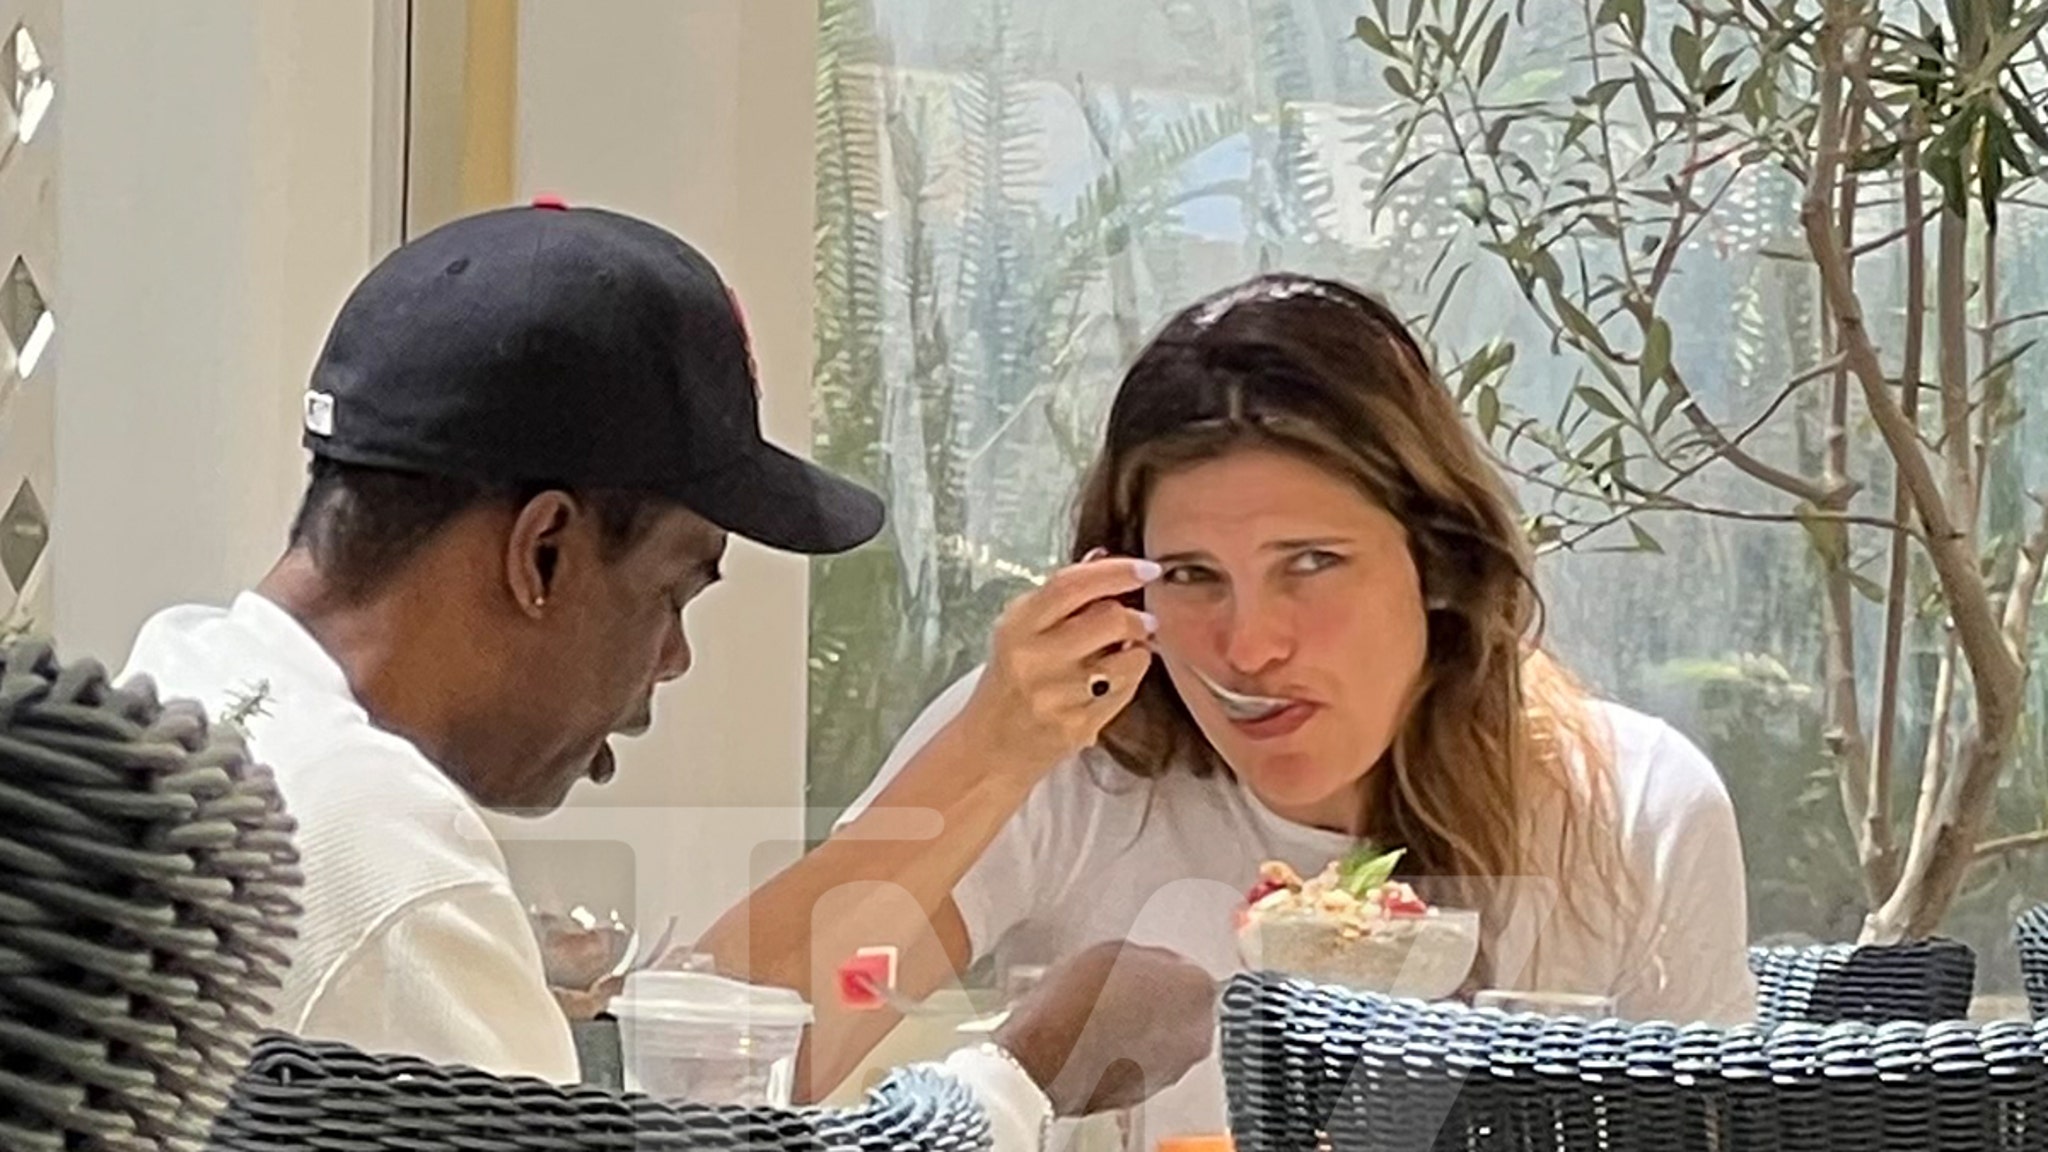 Chris Rock and Lake Bell Hit Brunch Date, Seem to Go Public as Couple thumbnail